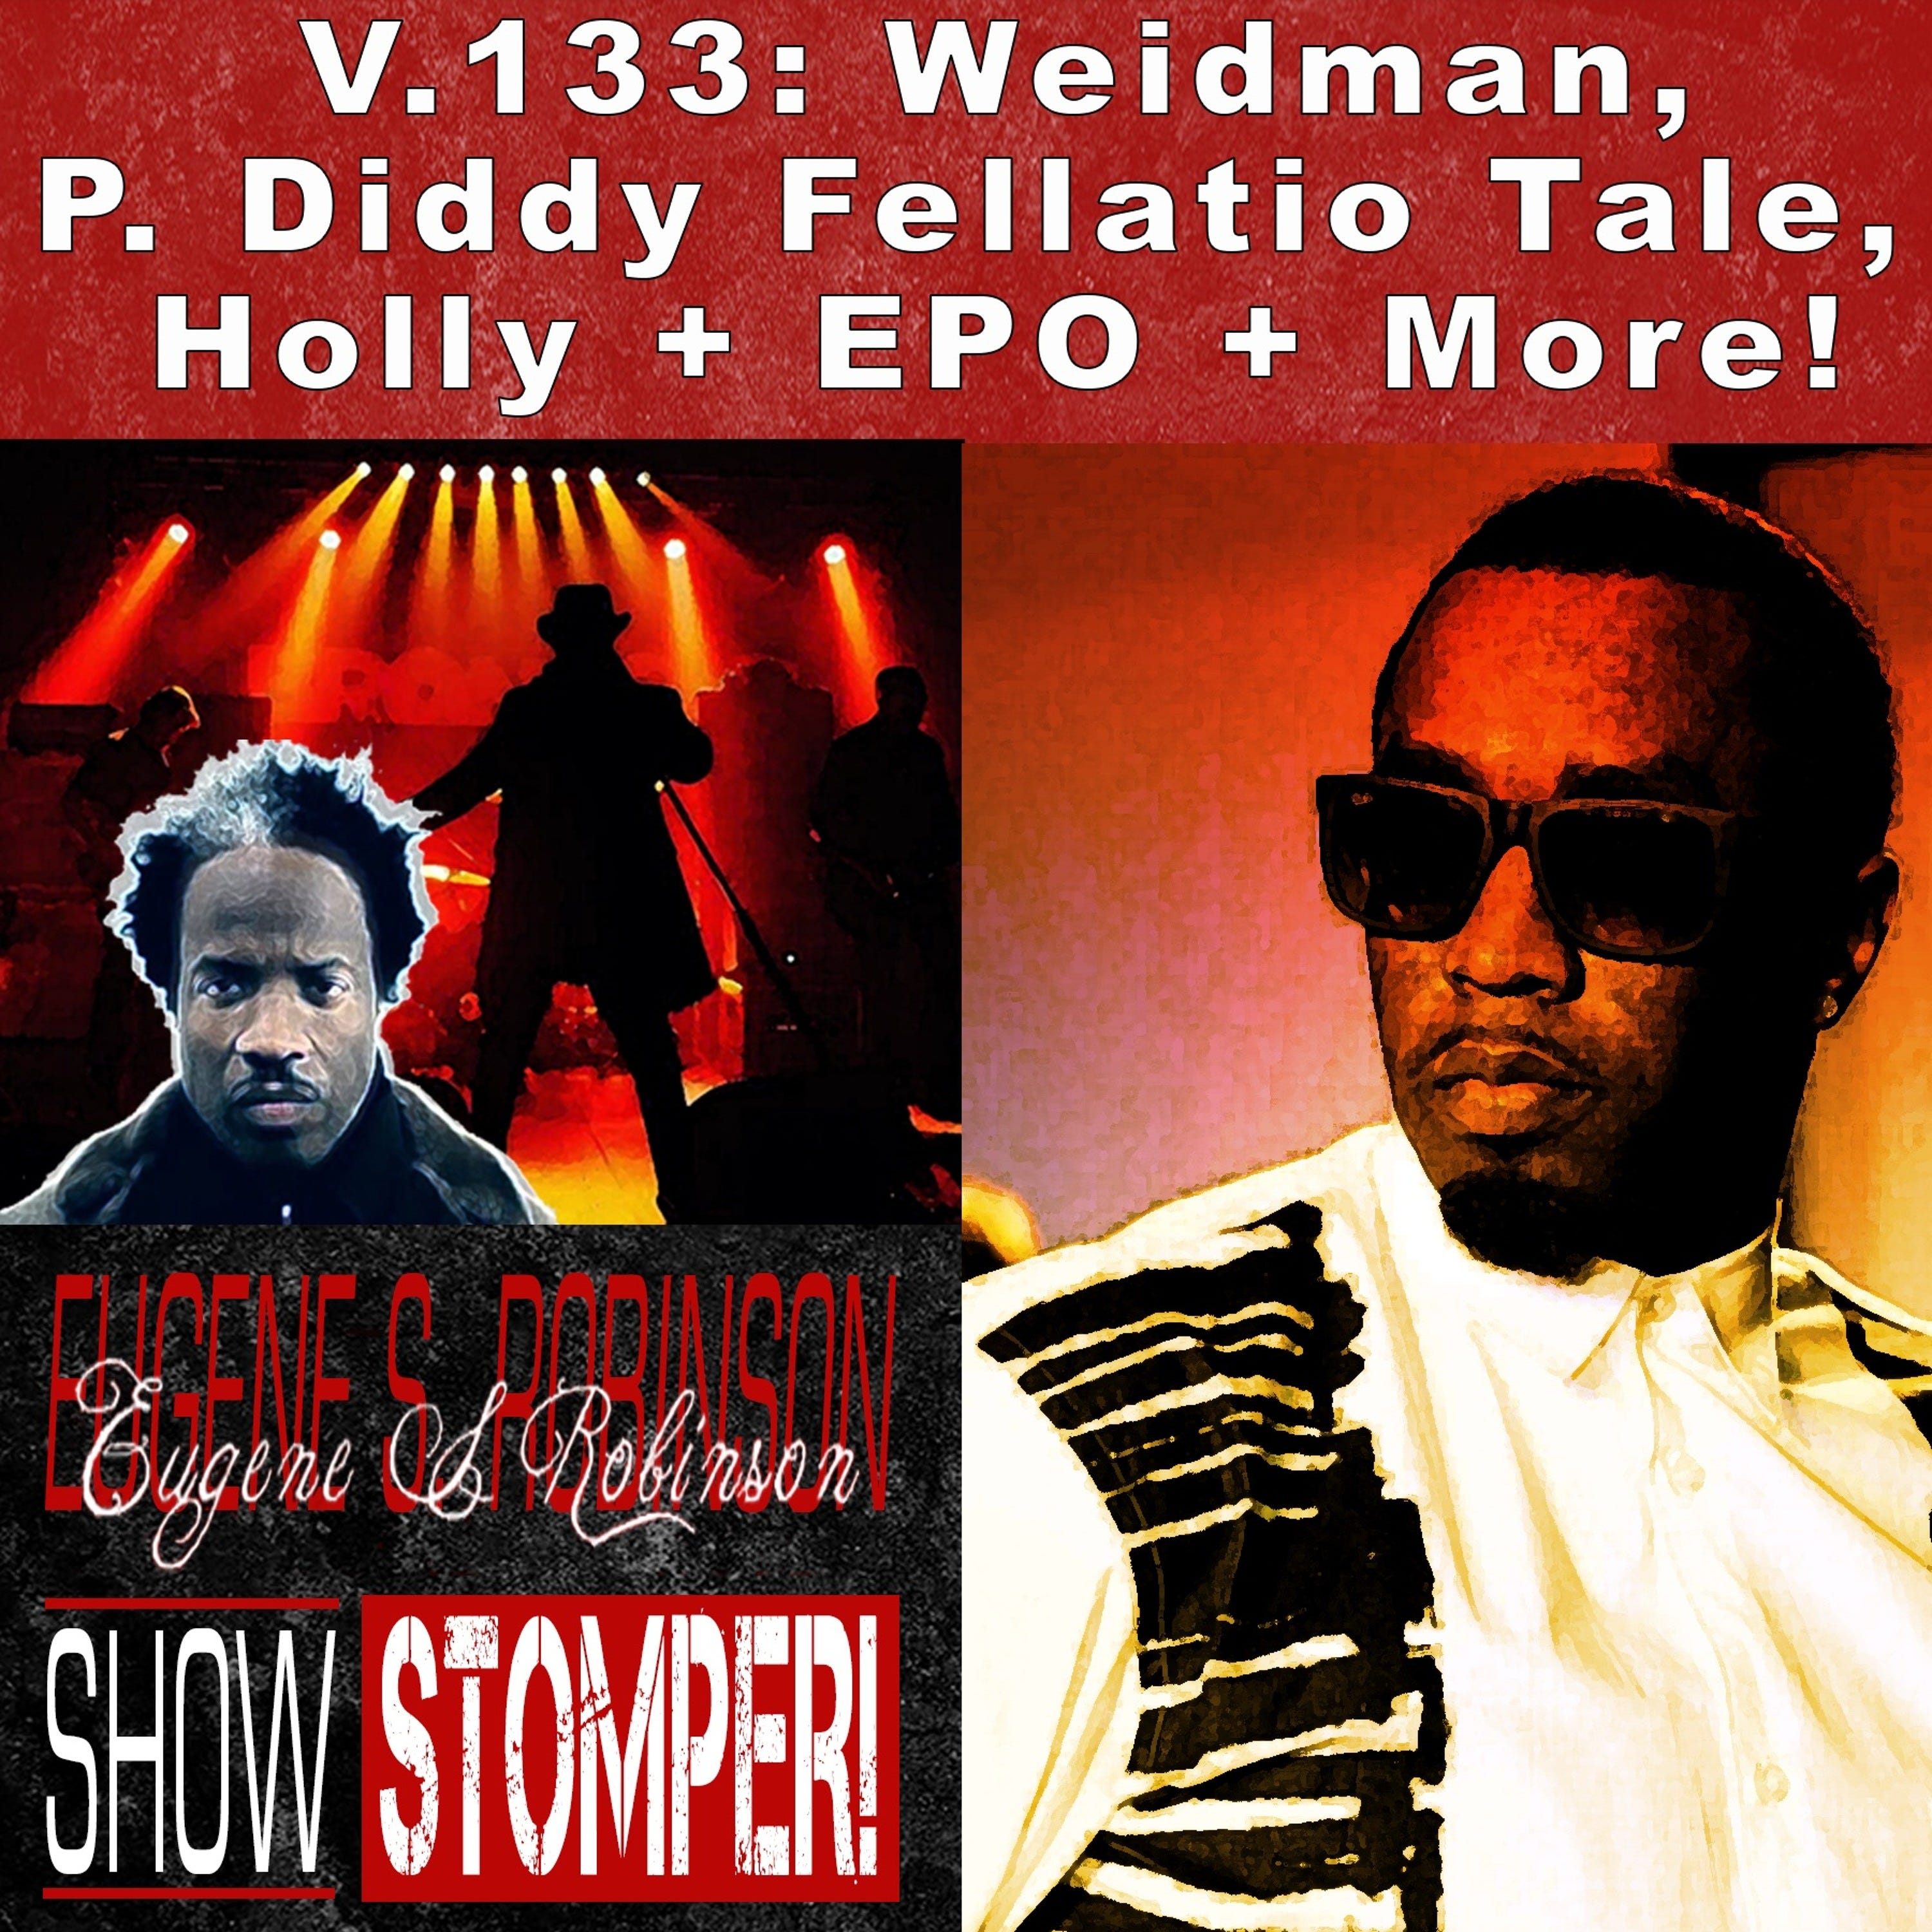 V.133 Weidman, P. Diddy Fellatio Tale, Holly + EPO + More On The Eugene S. Robinson Show Stompe